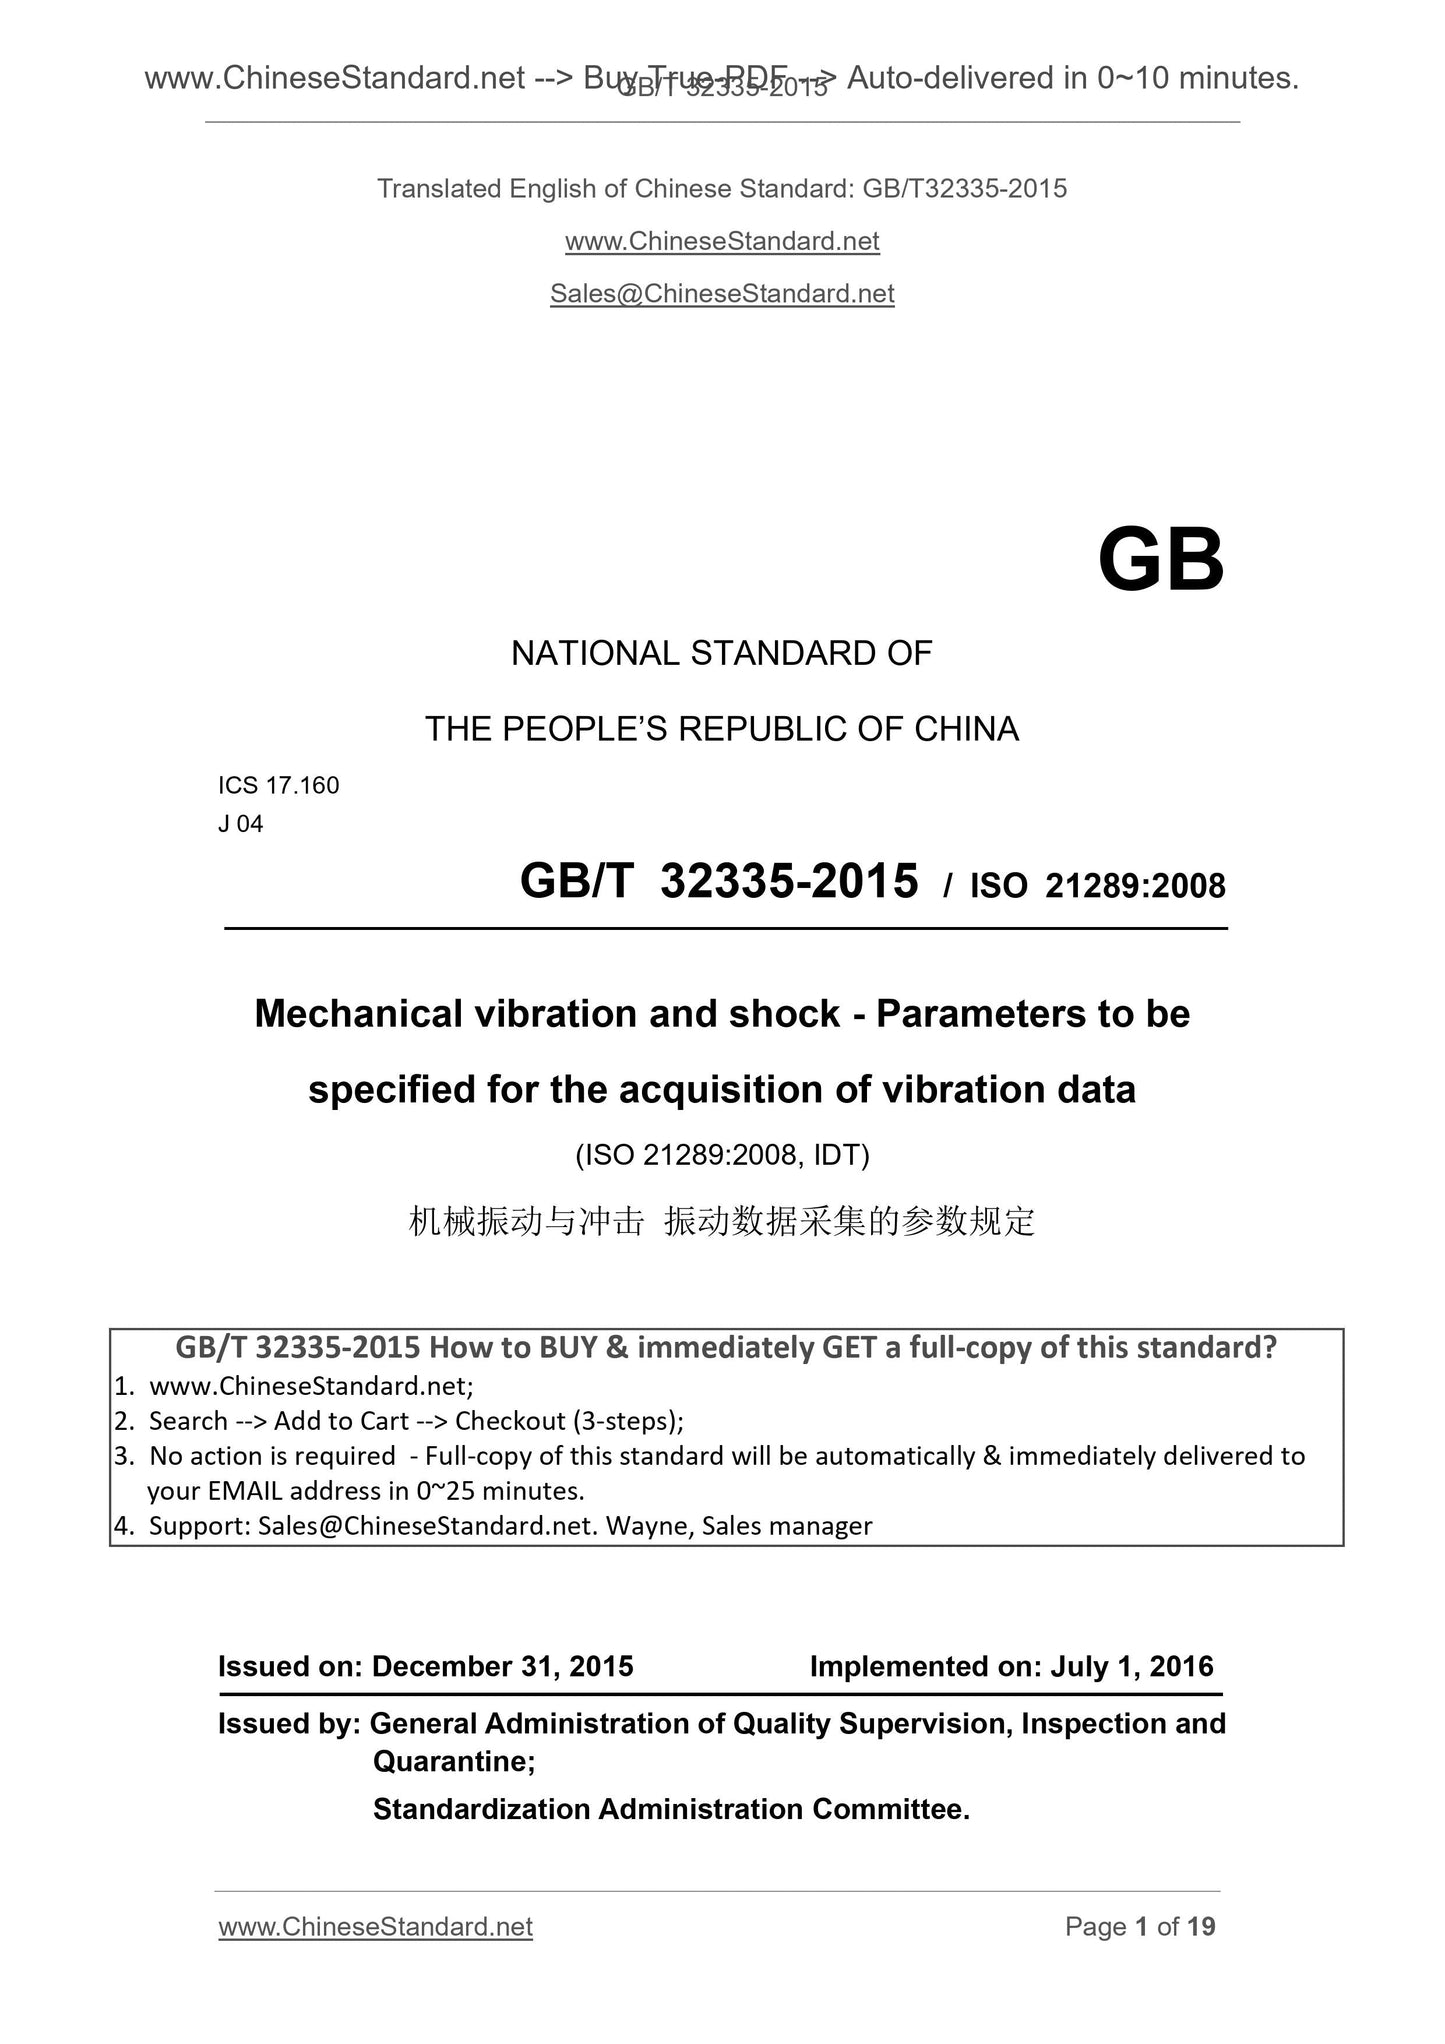 GB/T 32335-2015 Page 1